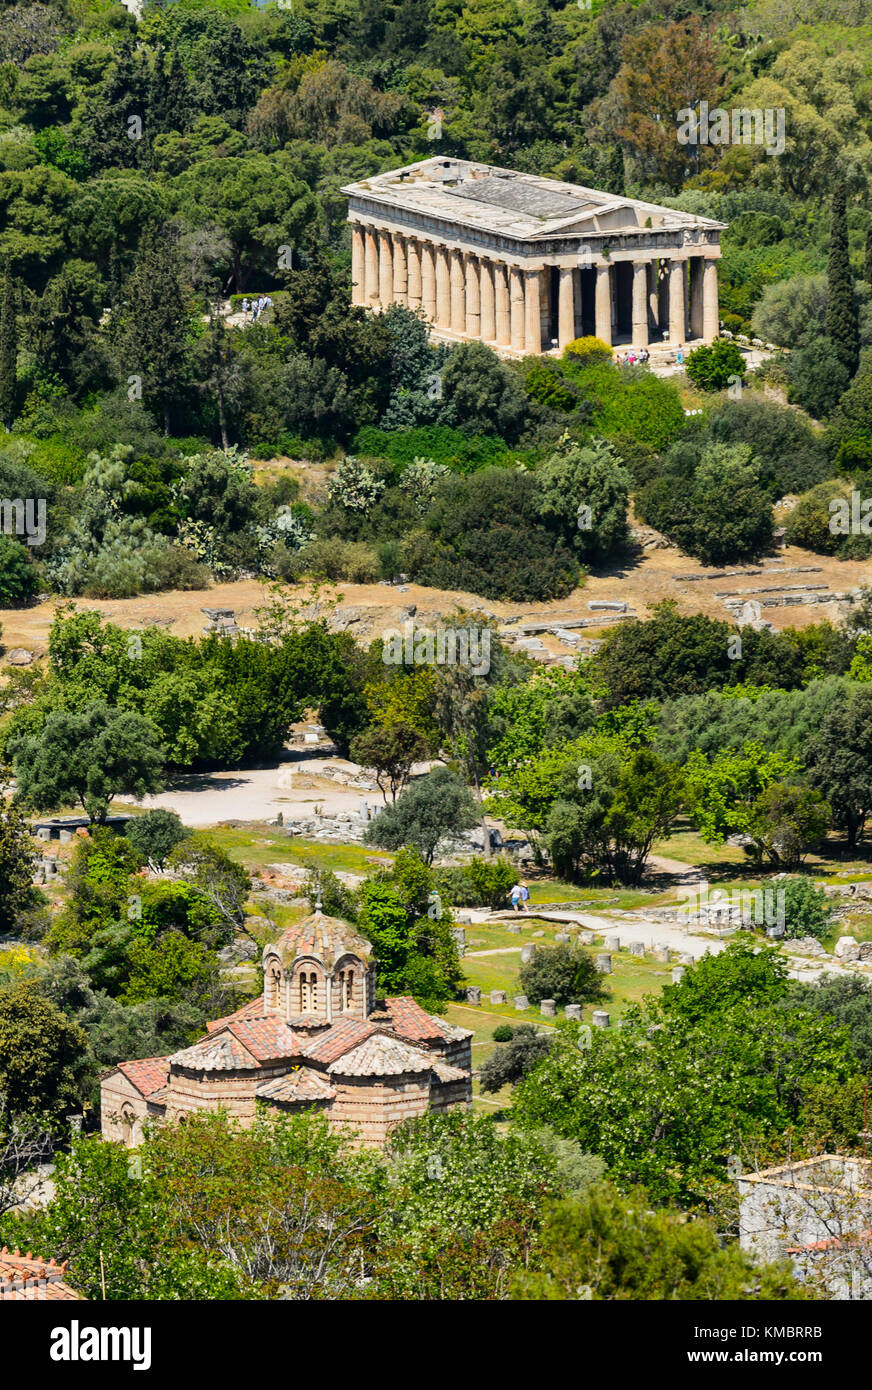 The Byzantine Church of the Holy Apostles and the Temple of Hephaestus in Athens, Greece Stock Photo